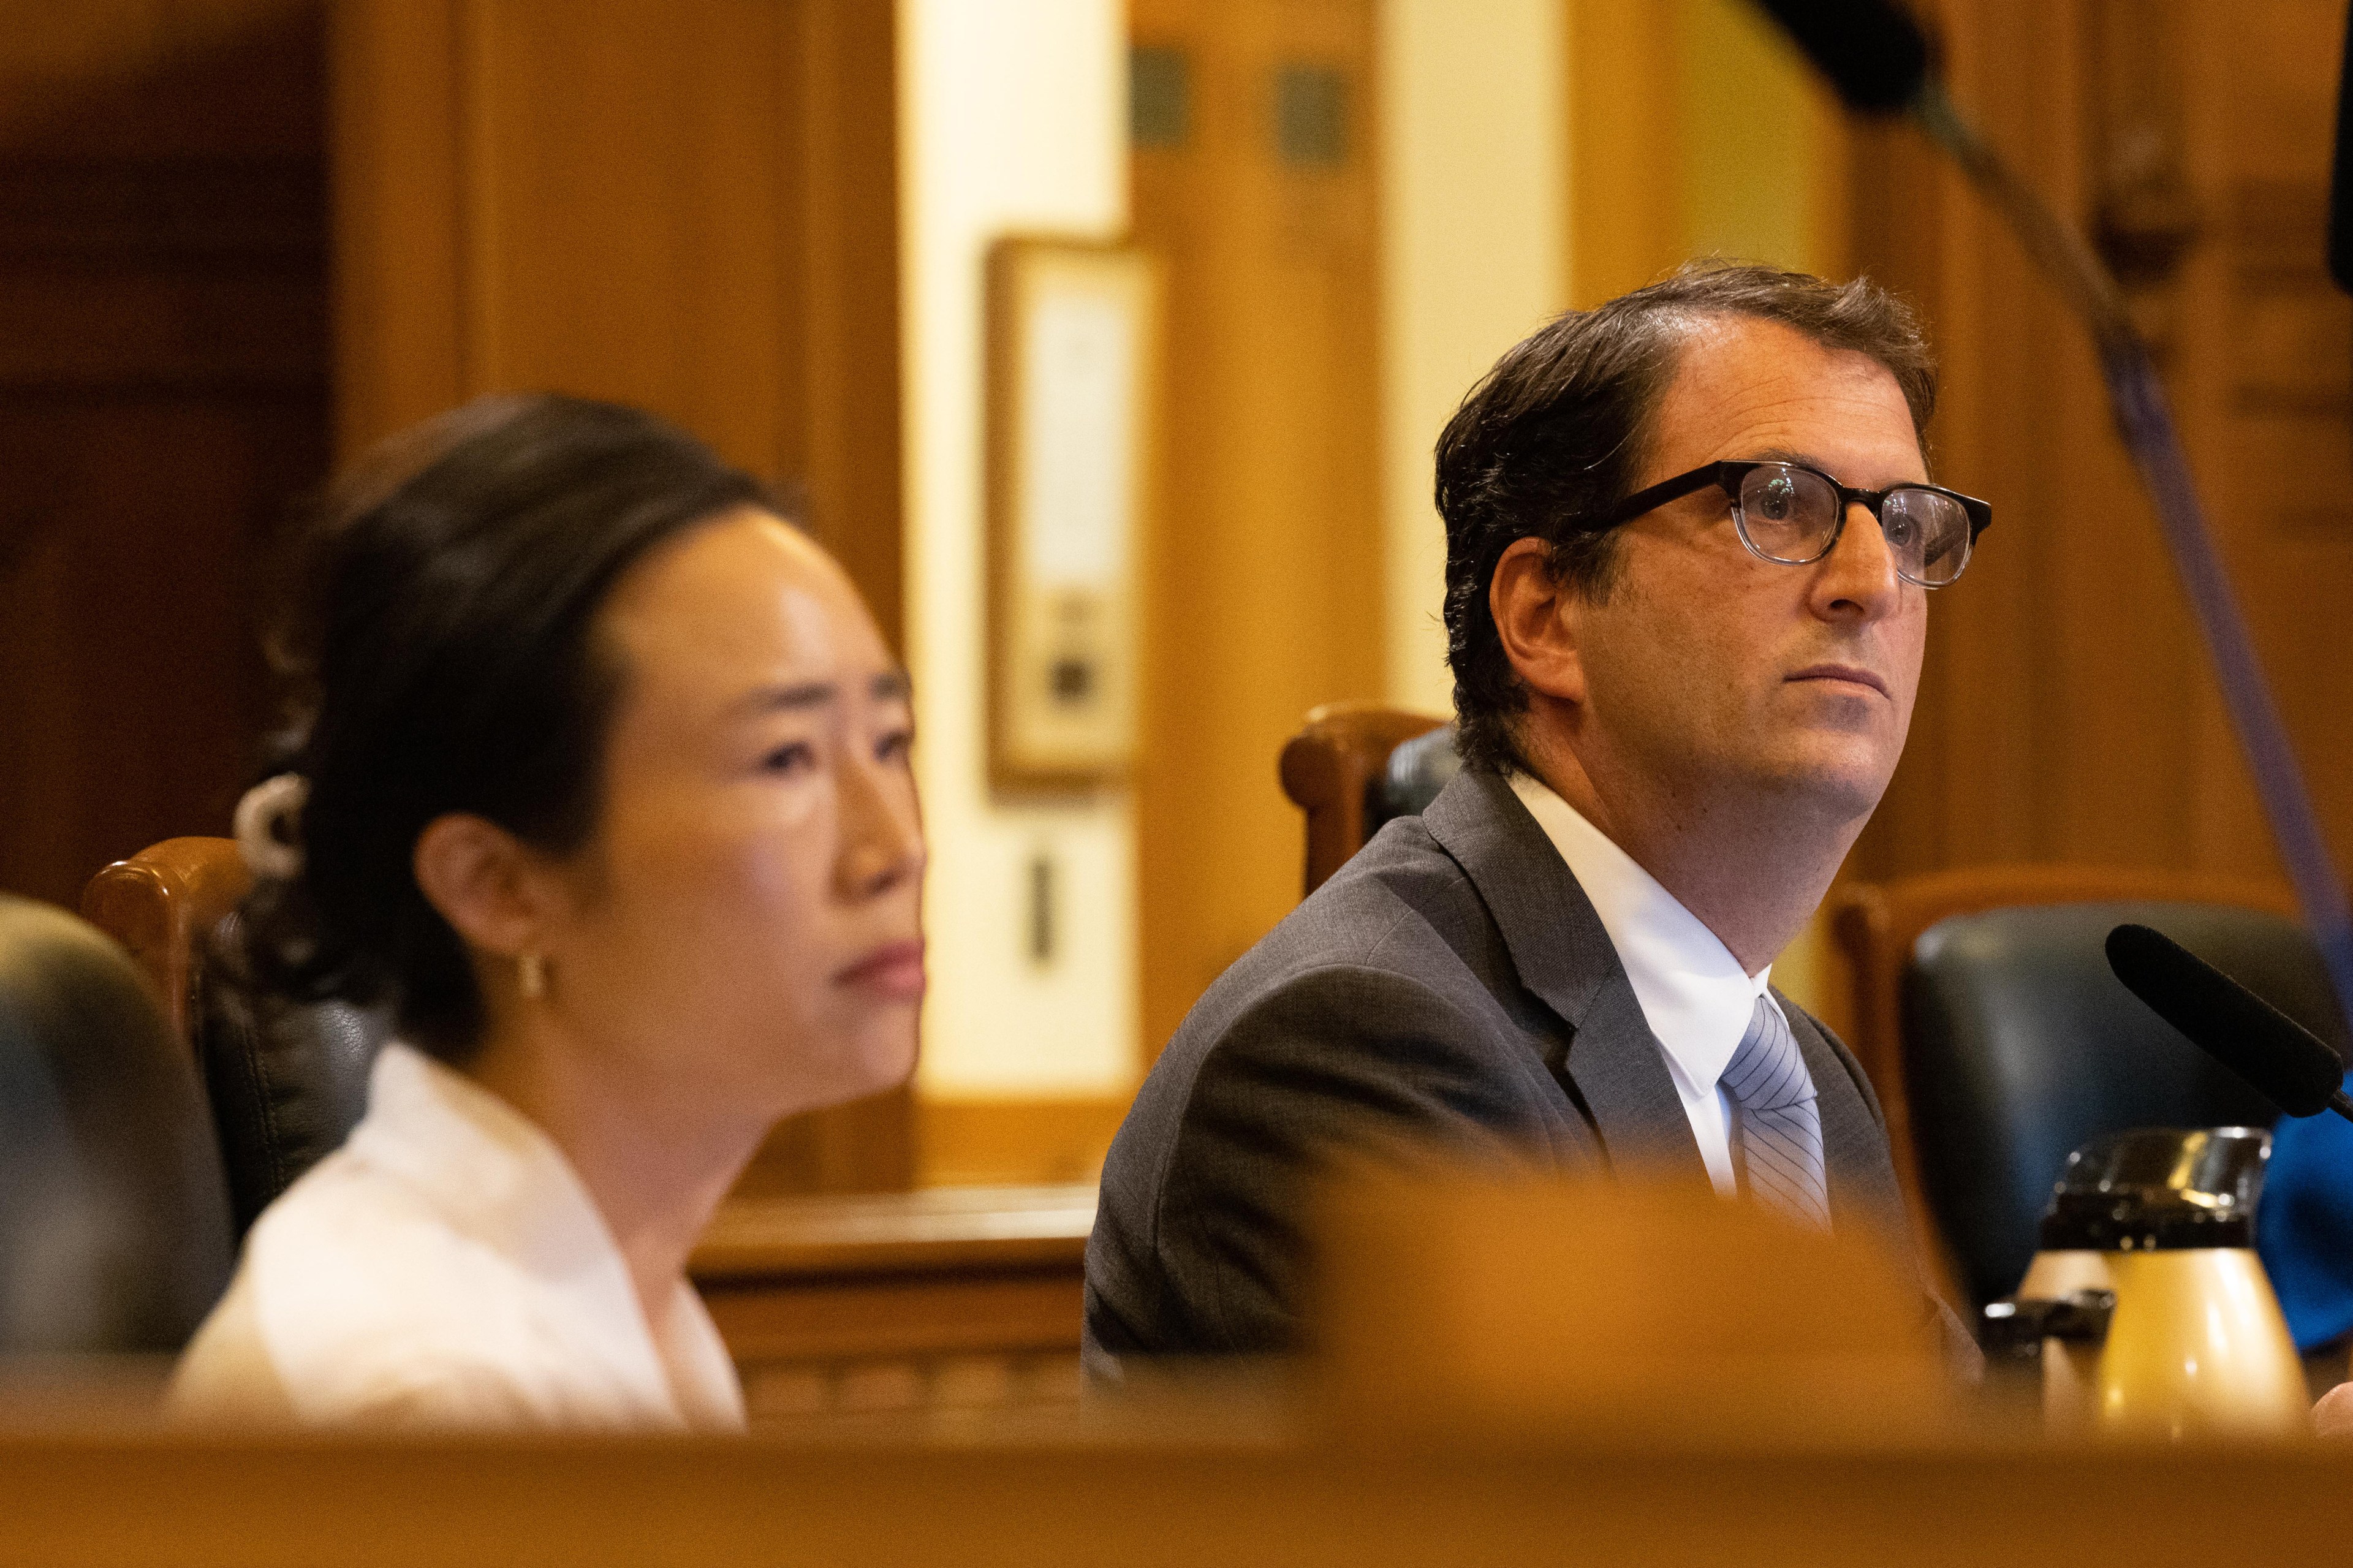 Supervisors Connie Chan and Dean Preston listen during a hearing at City Hall in San Francisco.